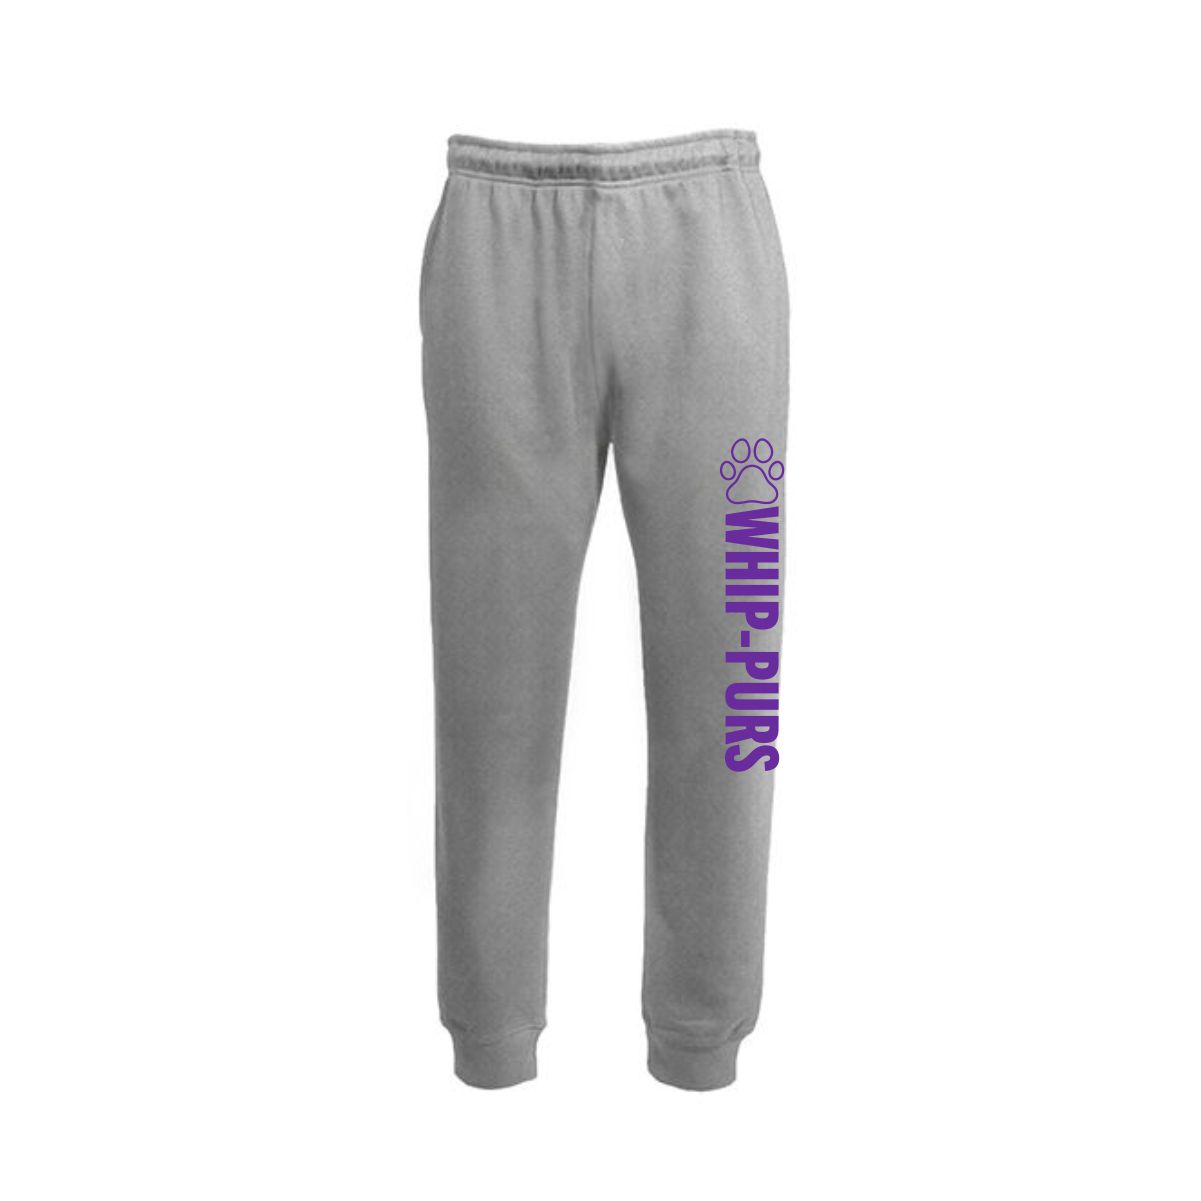 Hampshire Elementary School Adult & Youth Joggers | HyperStitch, Inc